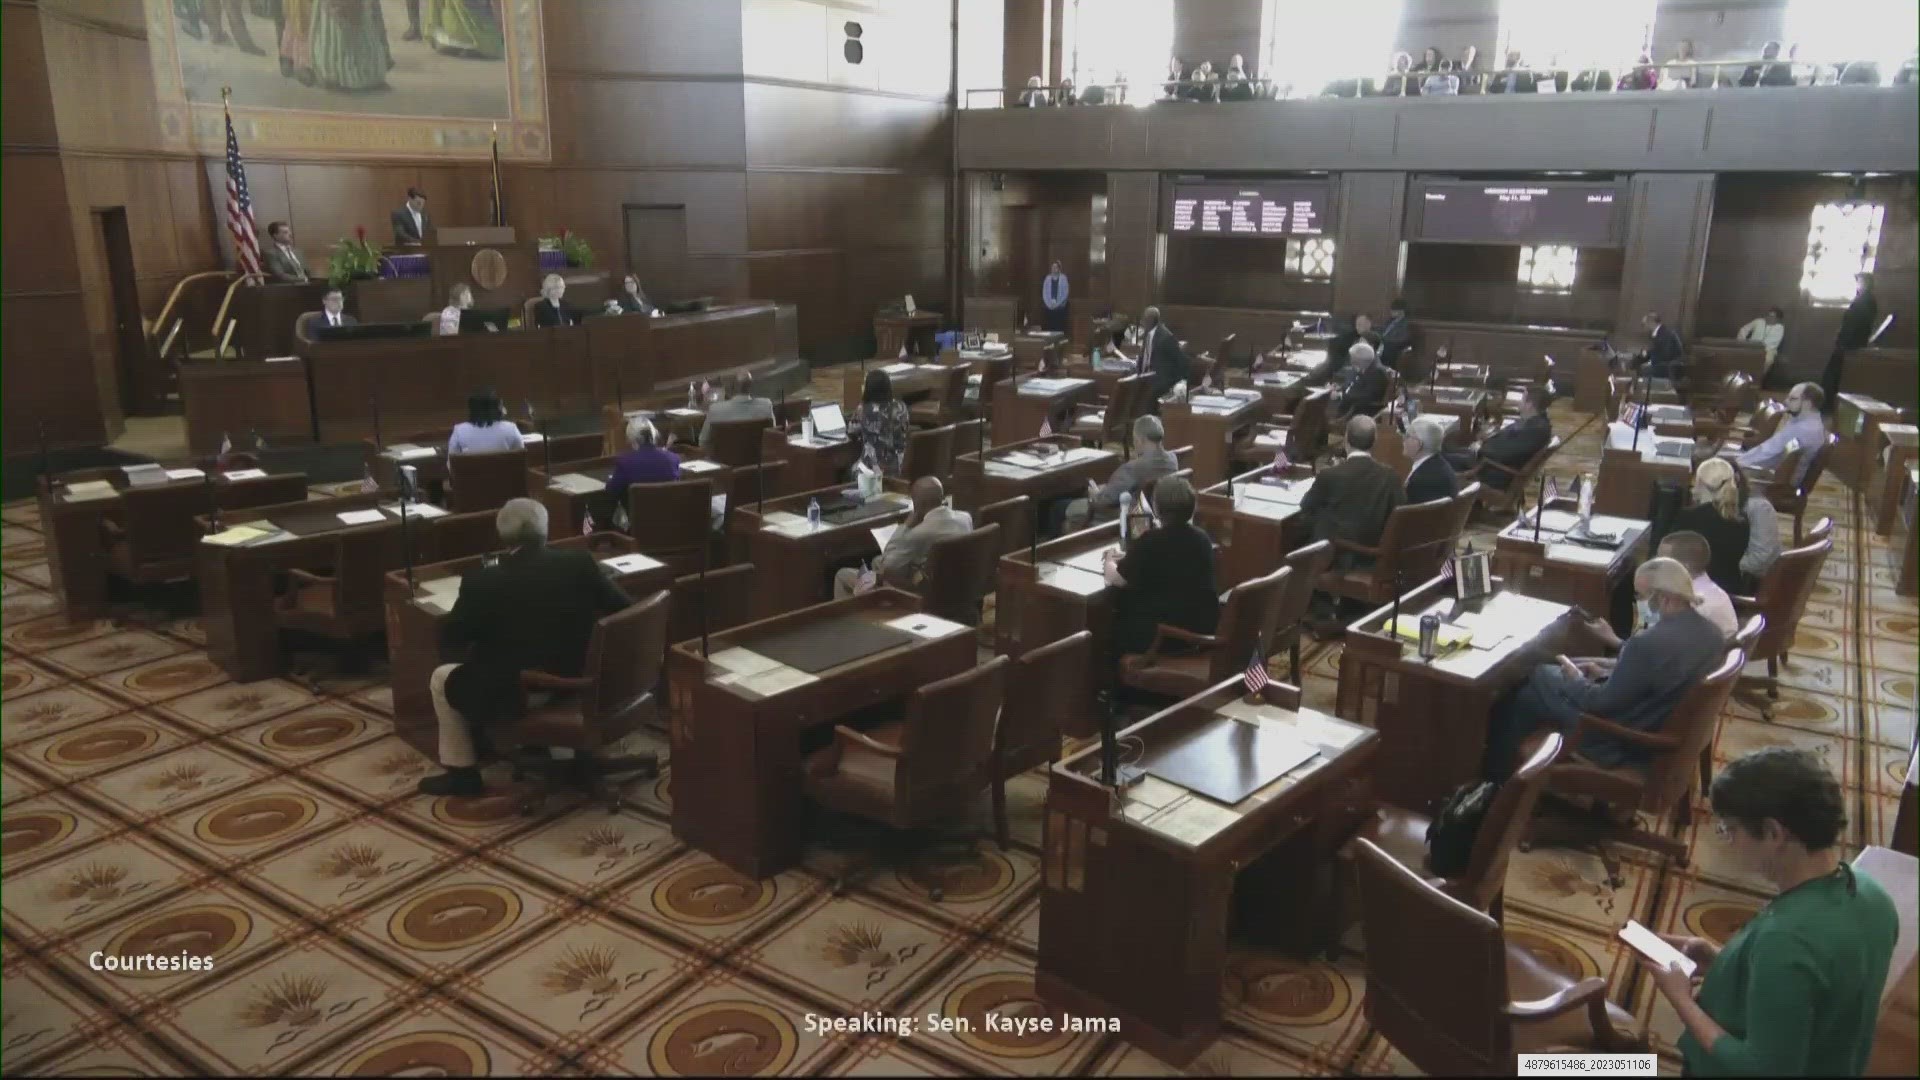 May 11 marked the ninth day of the Oregon Senate Republican's walkout. The Senate was adjourned until May 15.